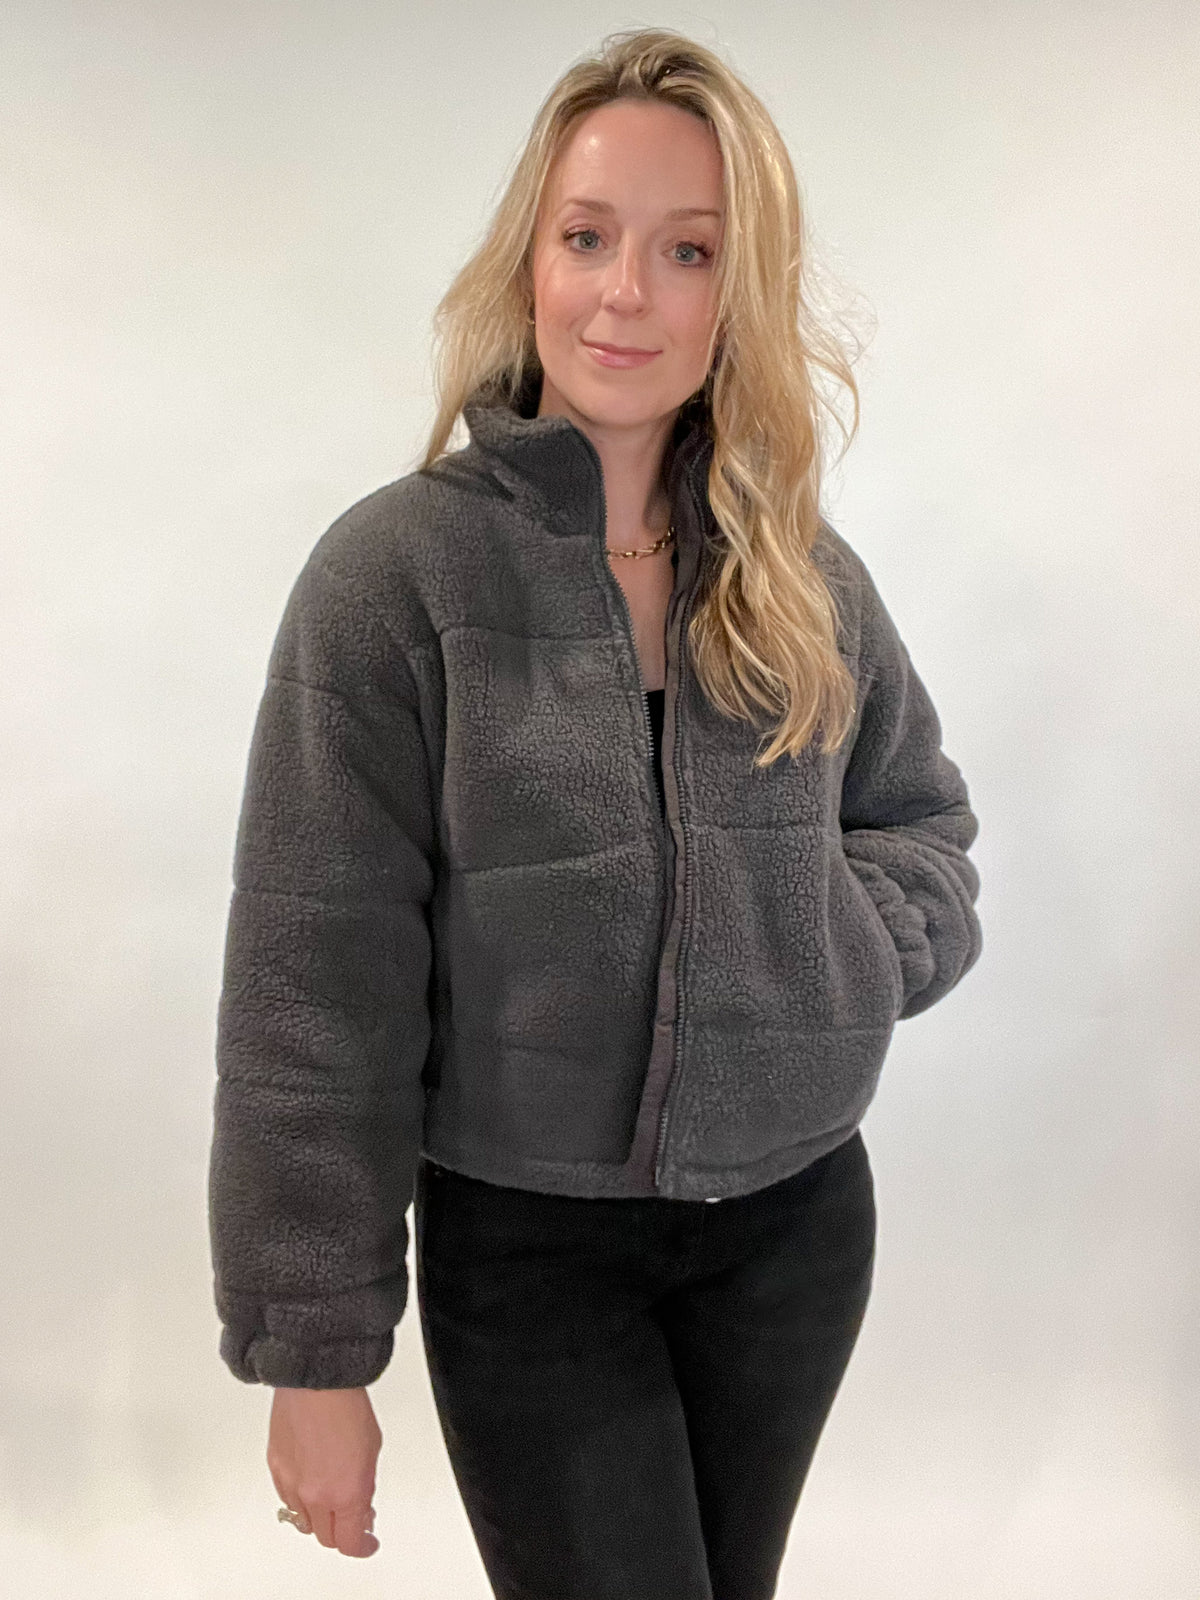 Stay warm and stylish with the Powder Puff Jacket. Its lined interior with slightly cropped cut makes it perfect for cool weather days. The pockets have secure zippers to keep your belongings safe, so you can wander with ease. A timeless piece for any wardrobe.